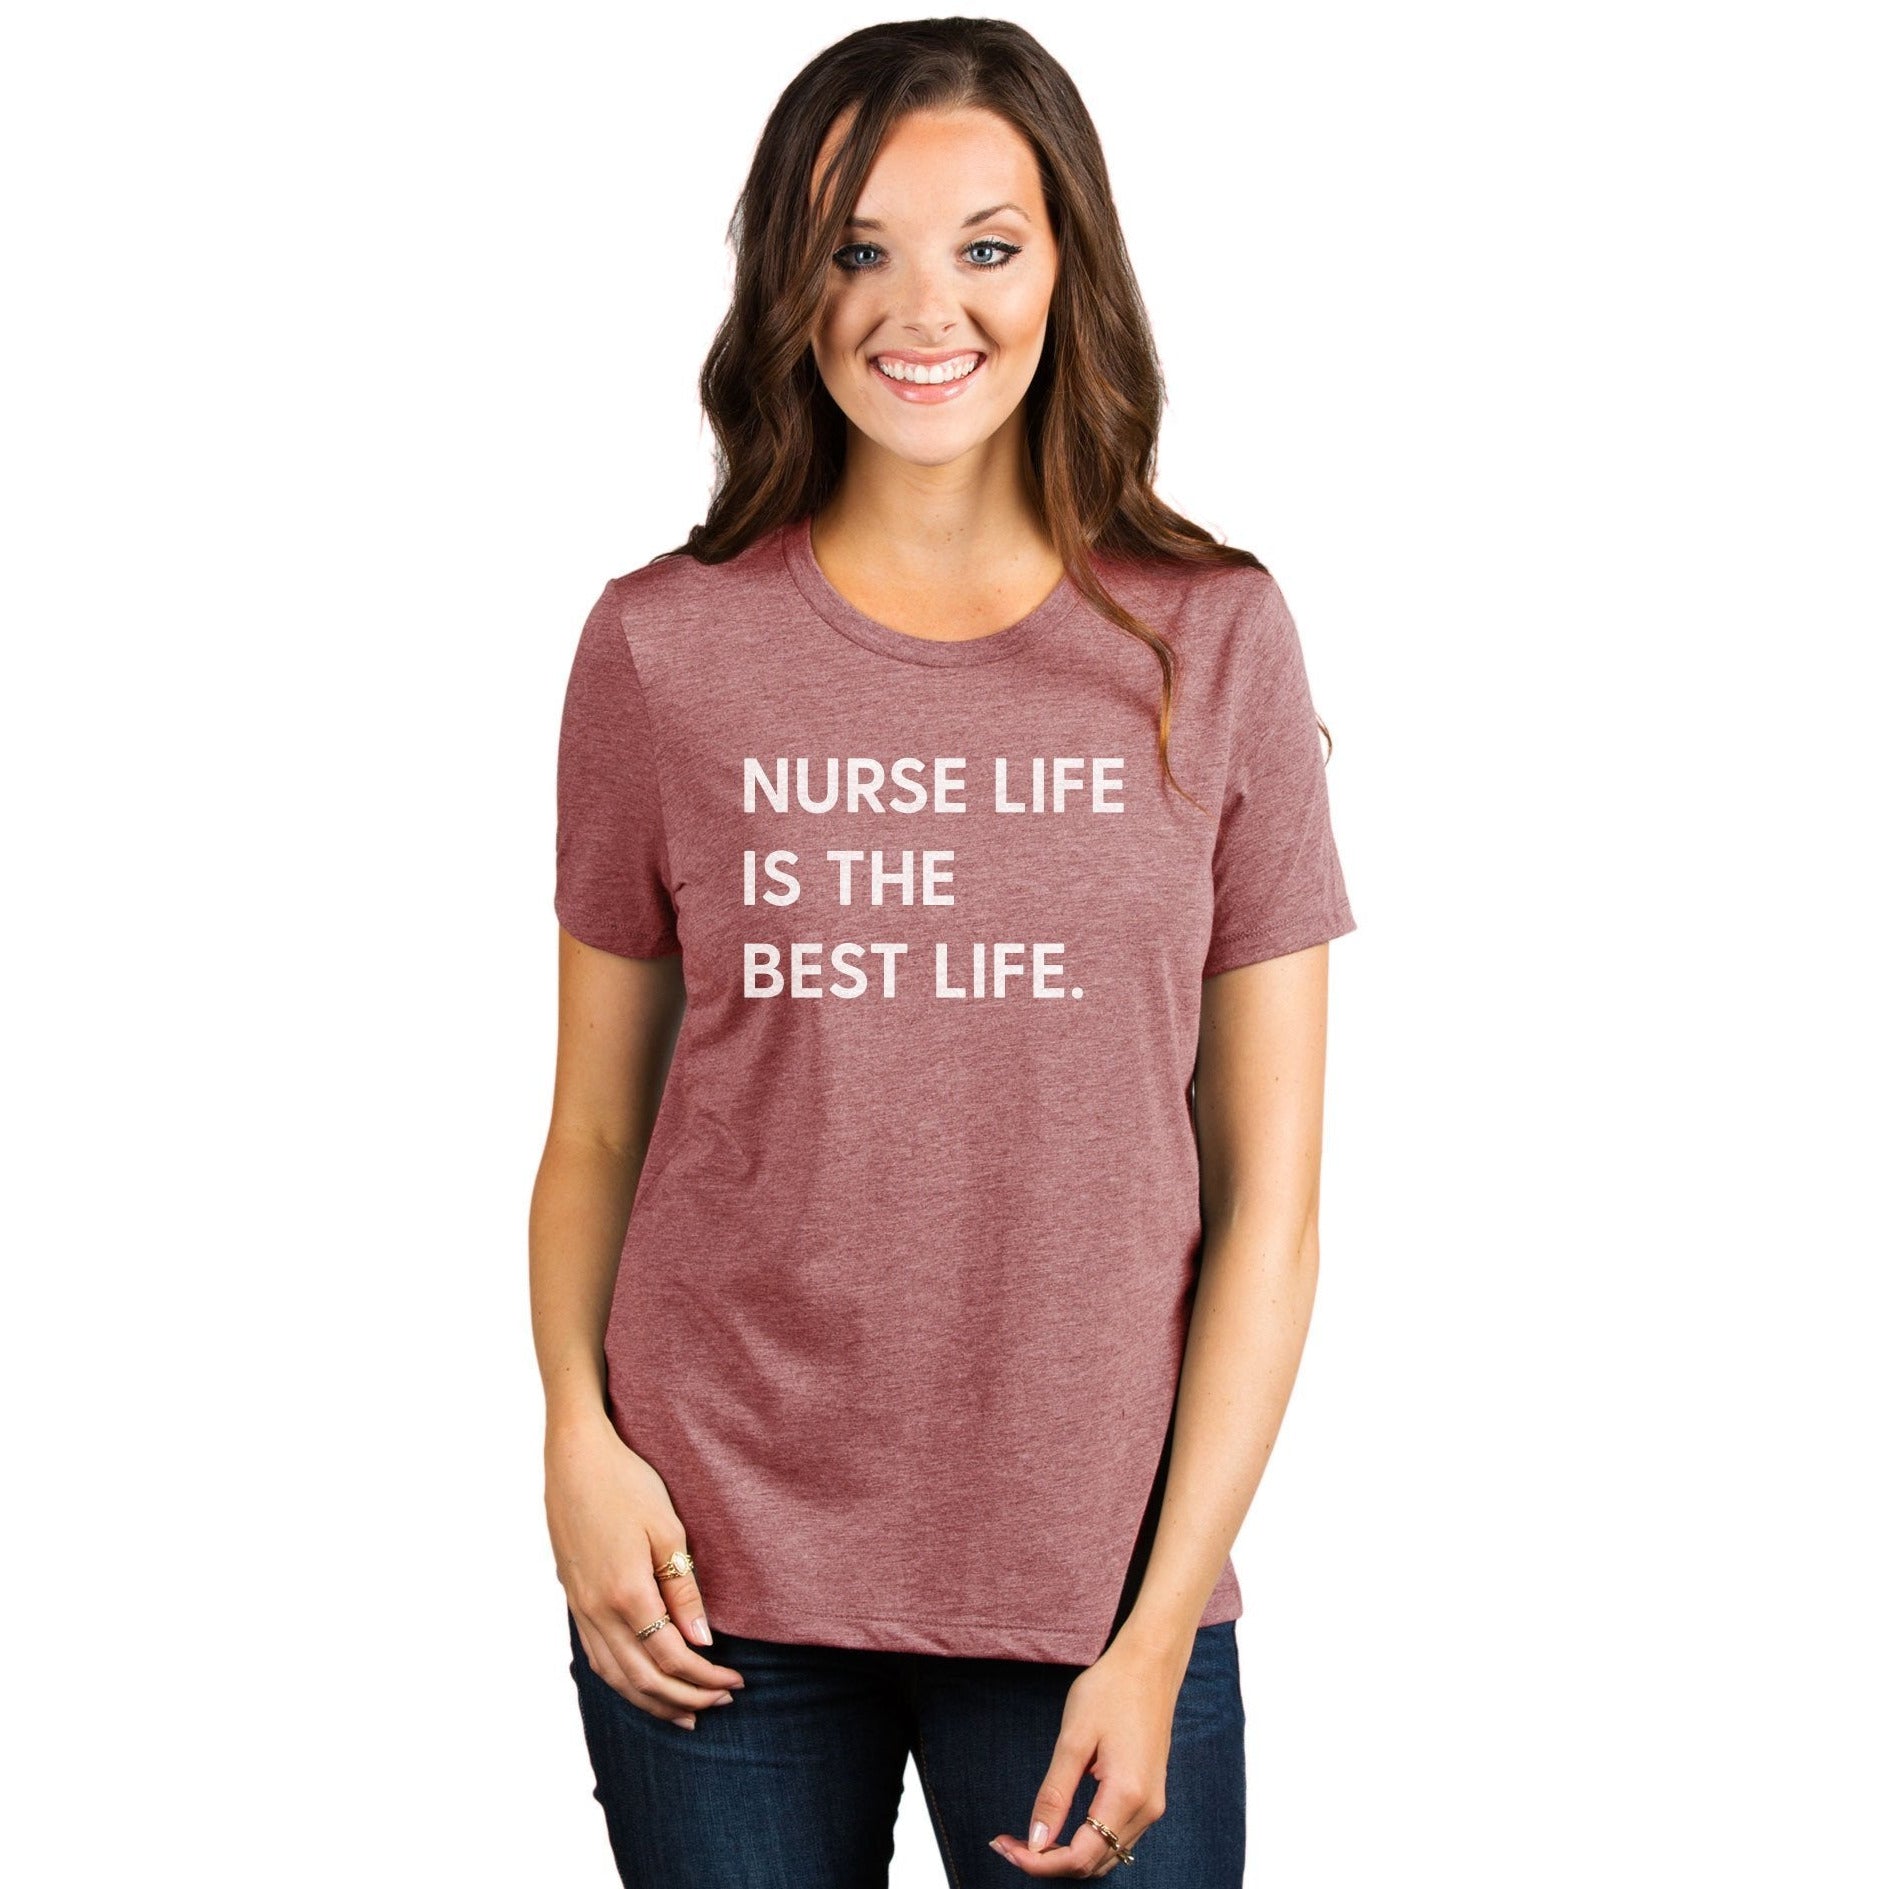 Nurse Definition Women's Relaxed Crewneck Graphic T-Shirt Top Tee